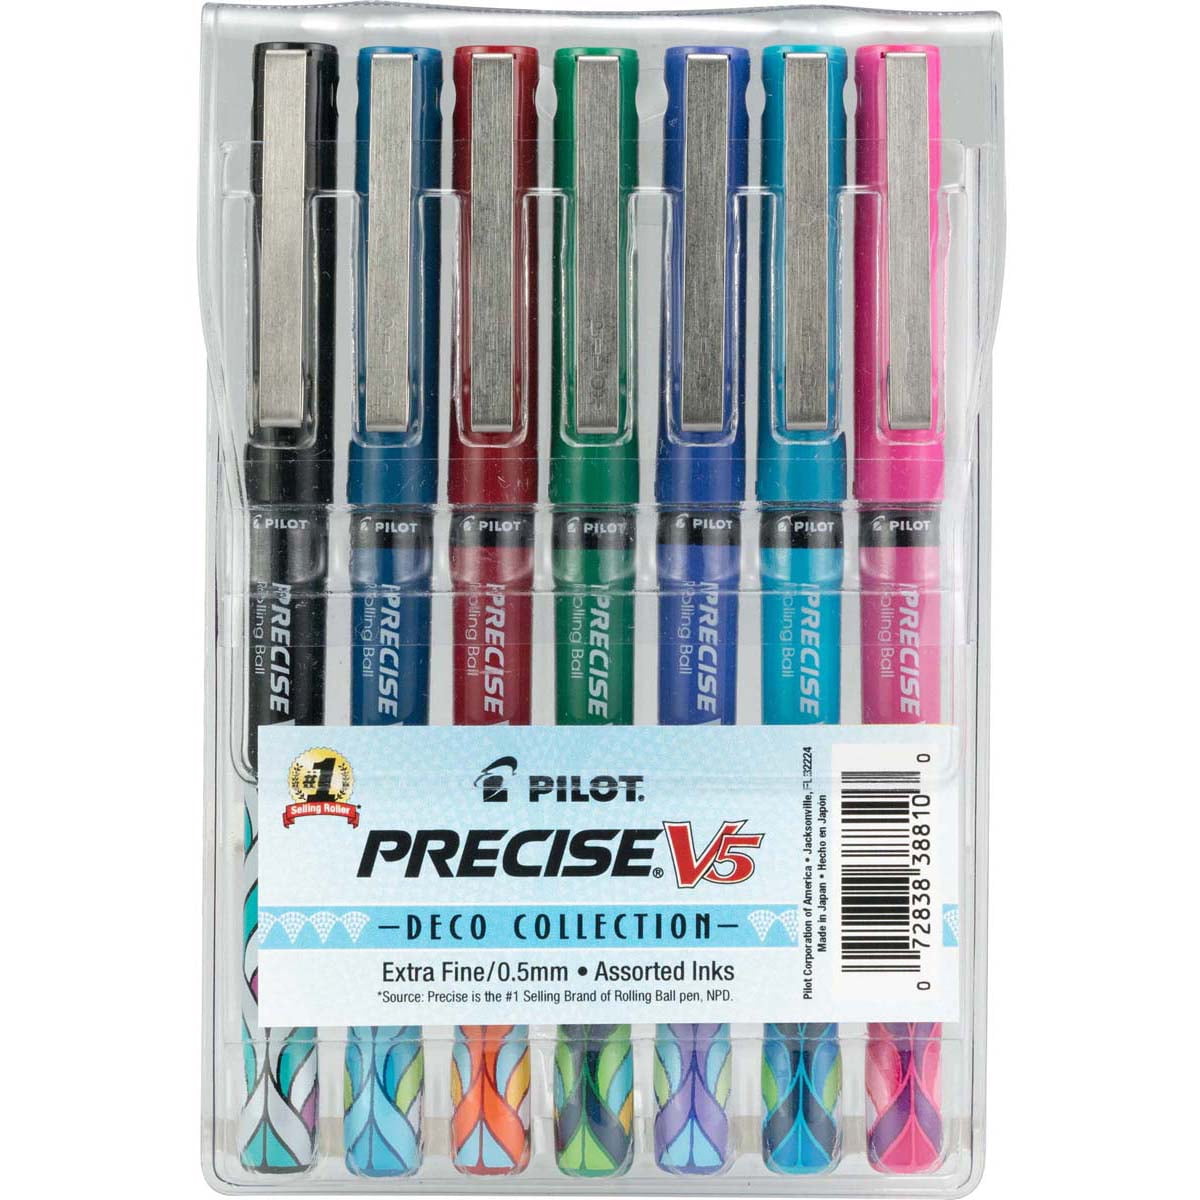 PILOT V5 PRECISE Rollerball Pens New X-Fine Point Assorted colors 7 